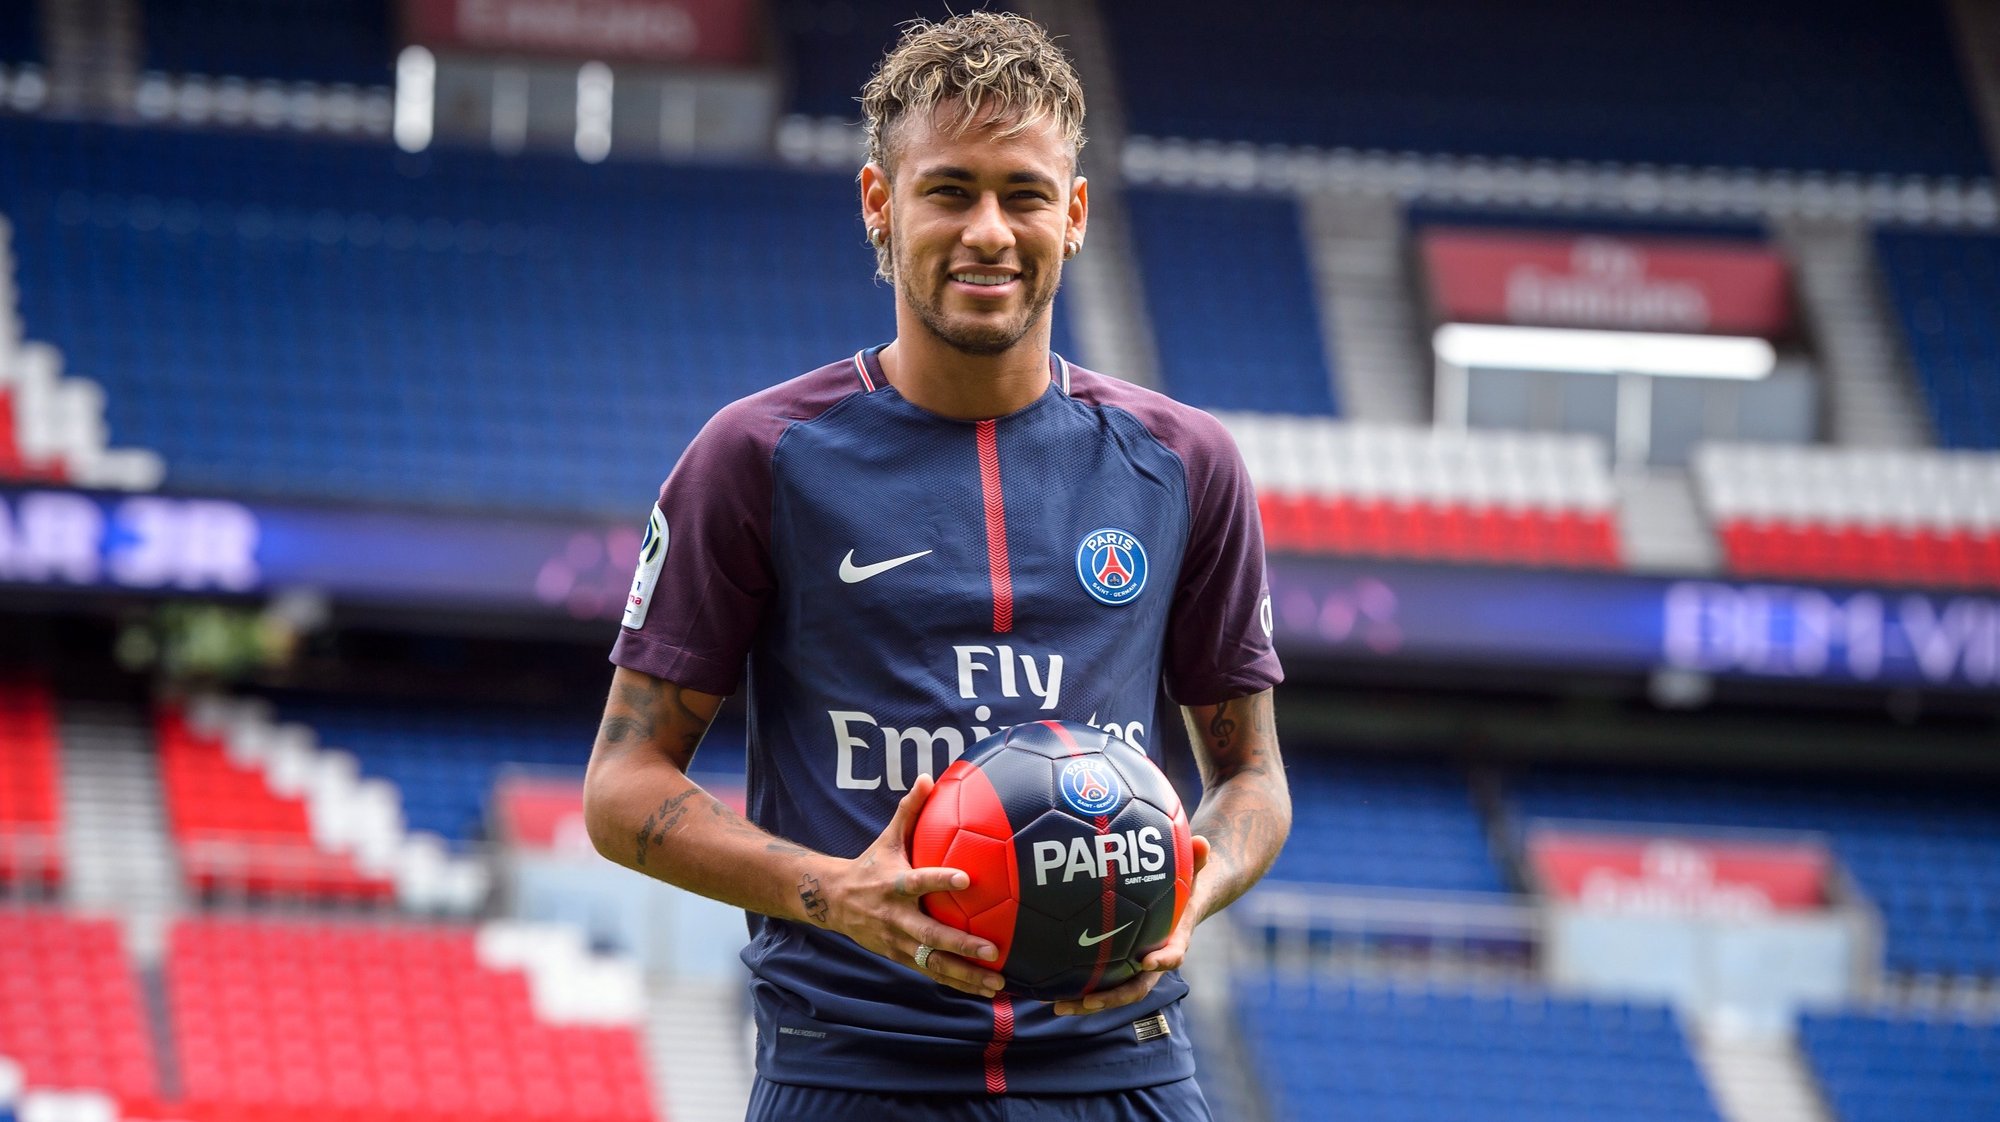 epa06124295 Brazilian striker Neymar Jr. poses for photographs with his new PSG jersey after a press conference at the Parc des Princes stadium in Paris, France, 04 August 2017. Neymar Jr is presented as new player of Paris Saint-Germain (PSG) after completing a record-breaking 222-million-euro move from Spanish side FC Barcelona.  EPA/CHRISTOPHE PETIT TESSON